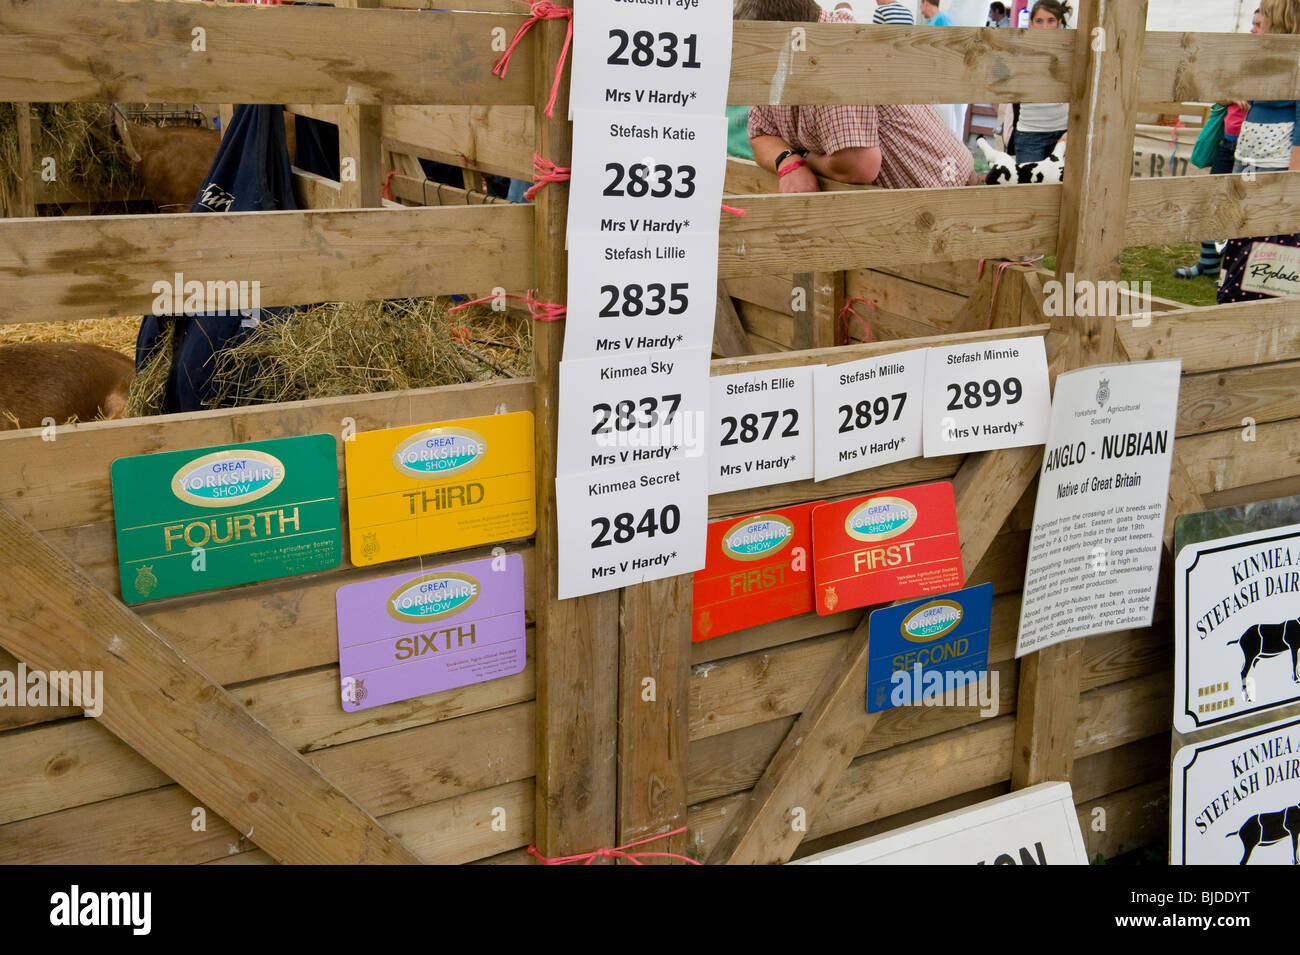 A goat pen at The Great Yorkshire Show, Harrogate, showing the certificates won by the animals held there. Stock Photo